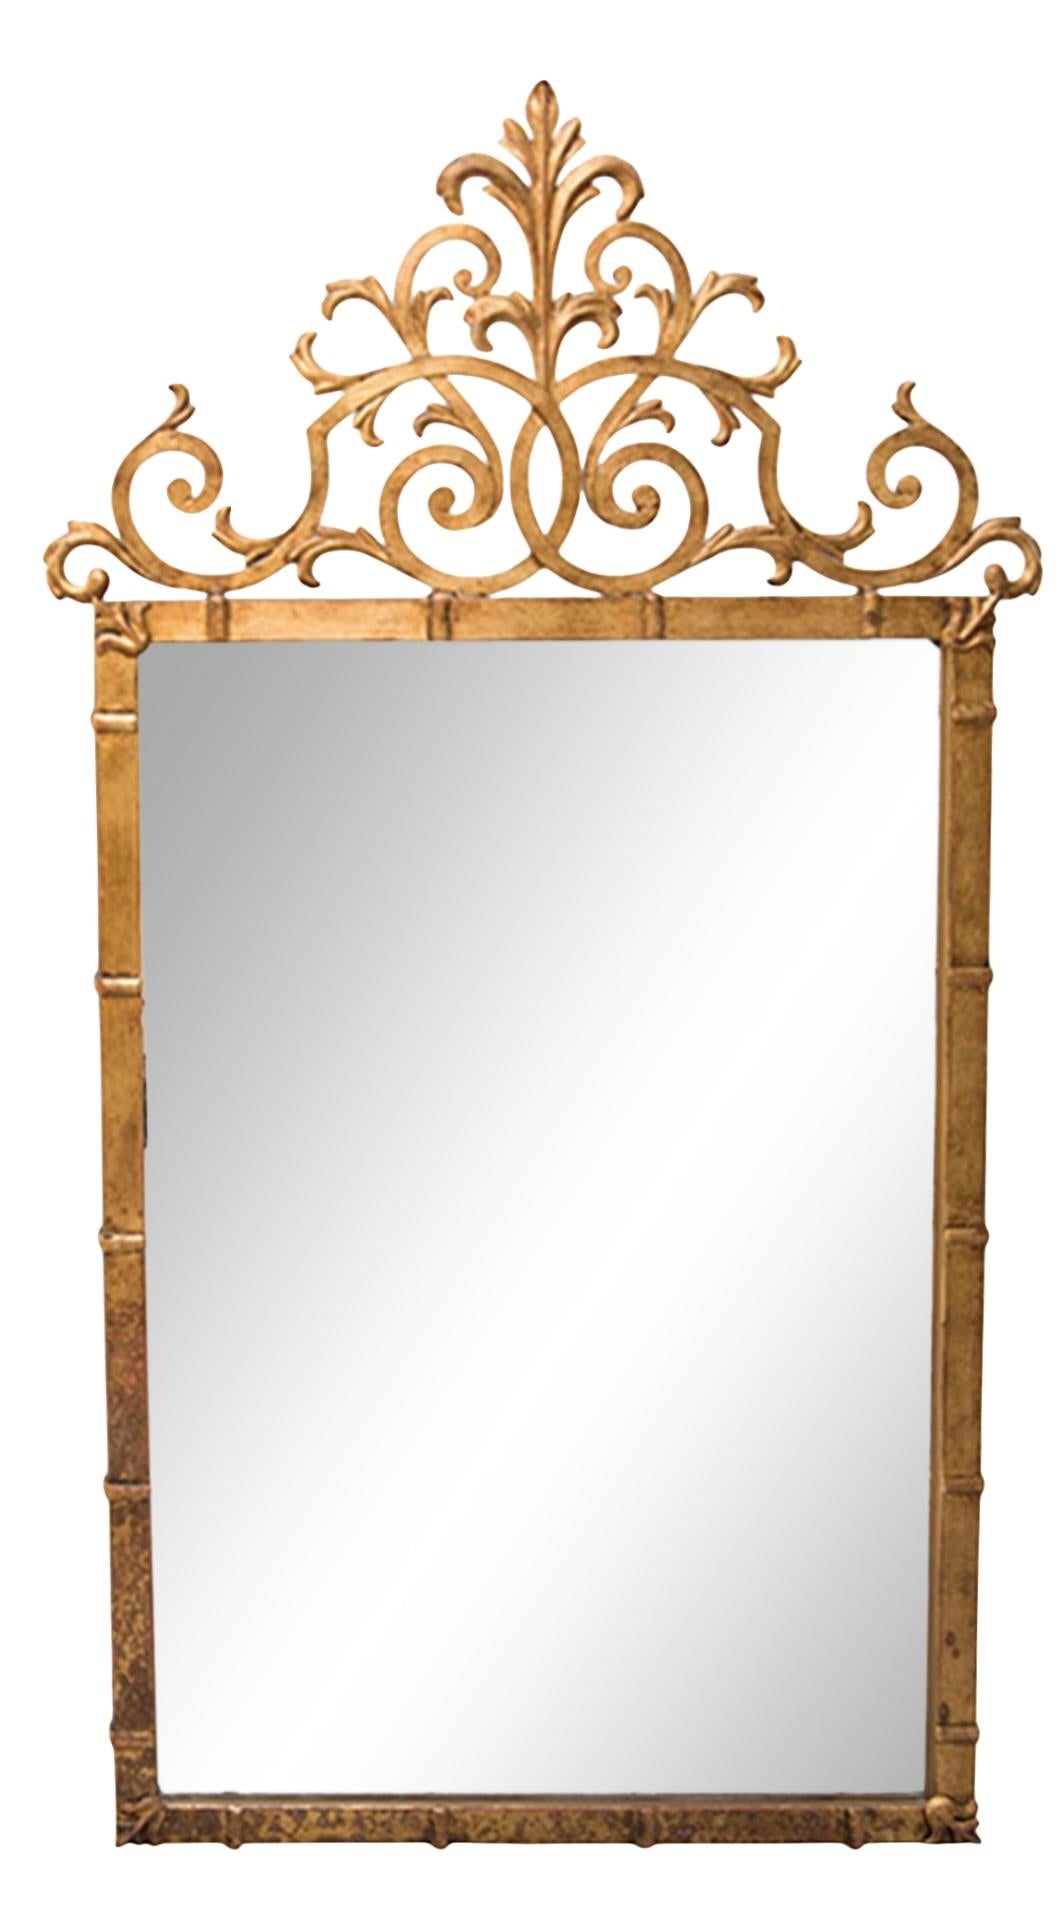 Palladio Gilt Metal Rococo Style Mirror Made in Italy 2